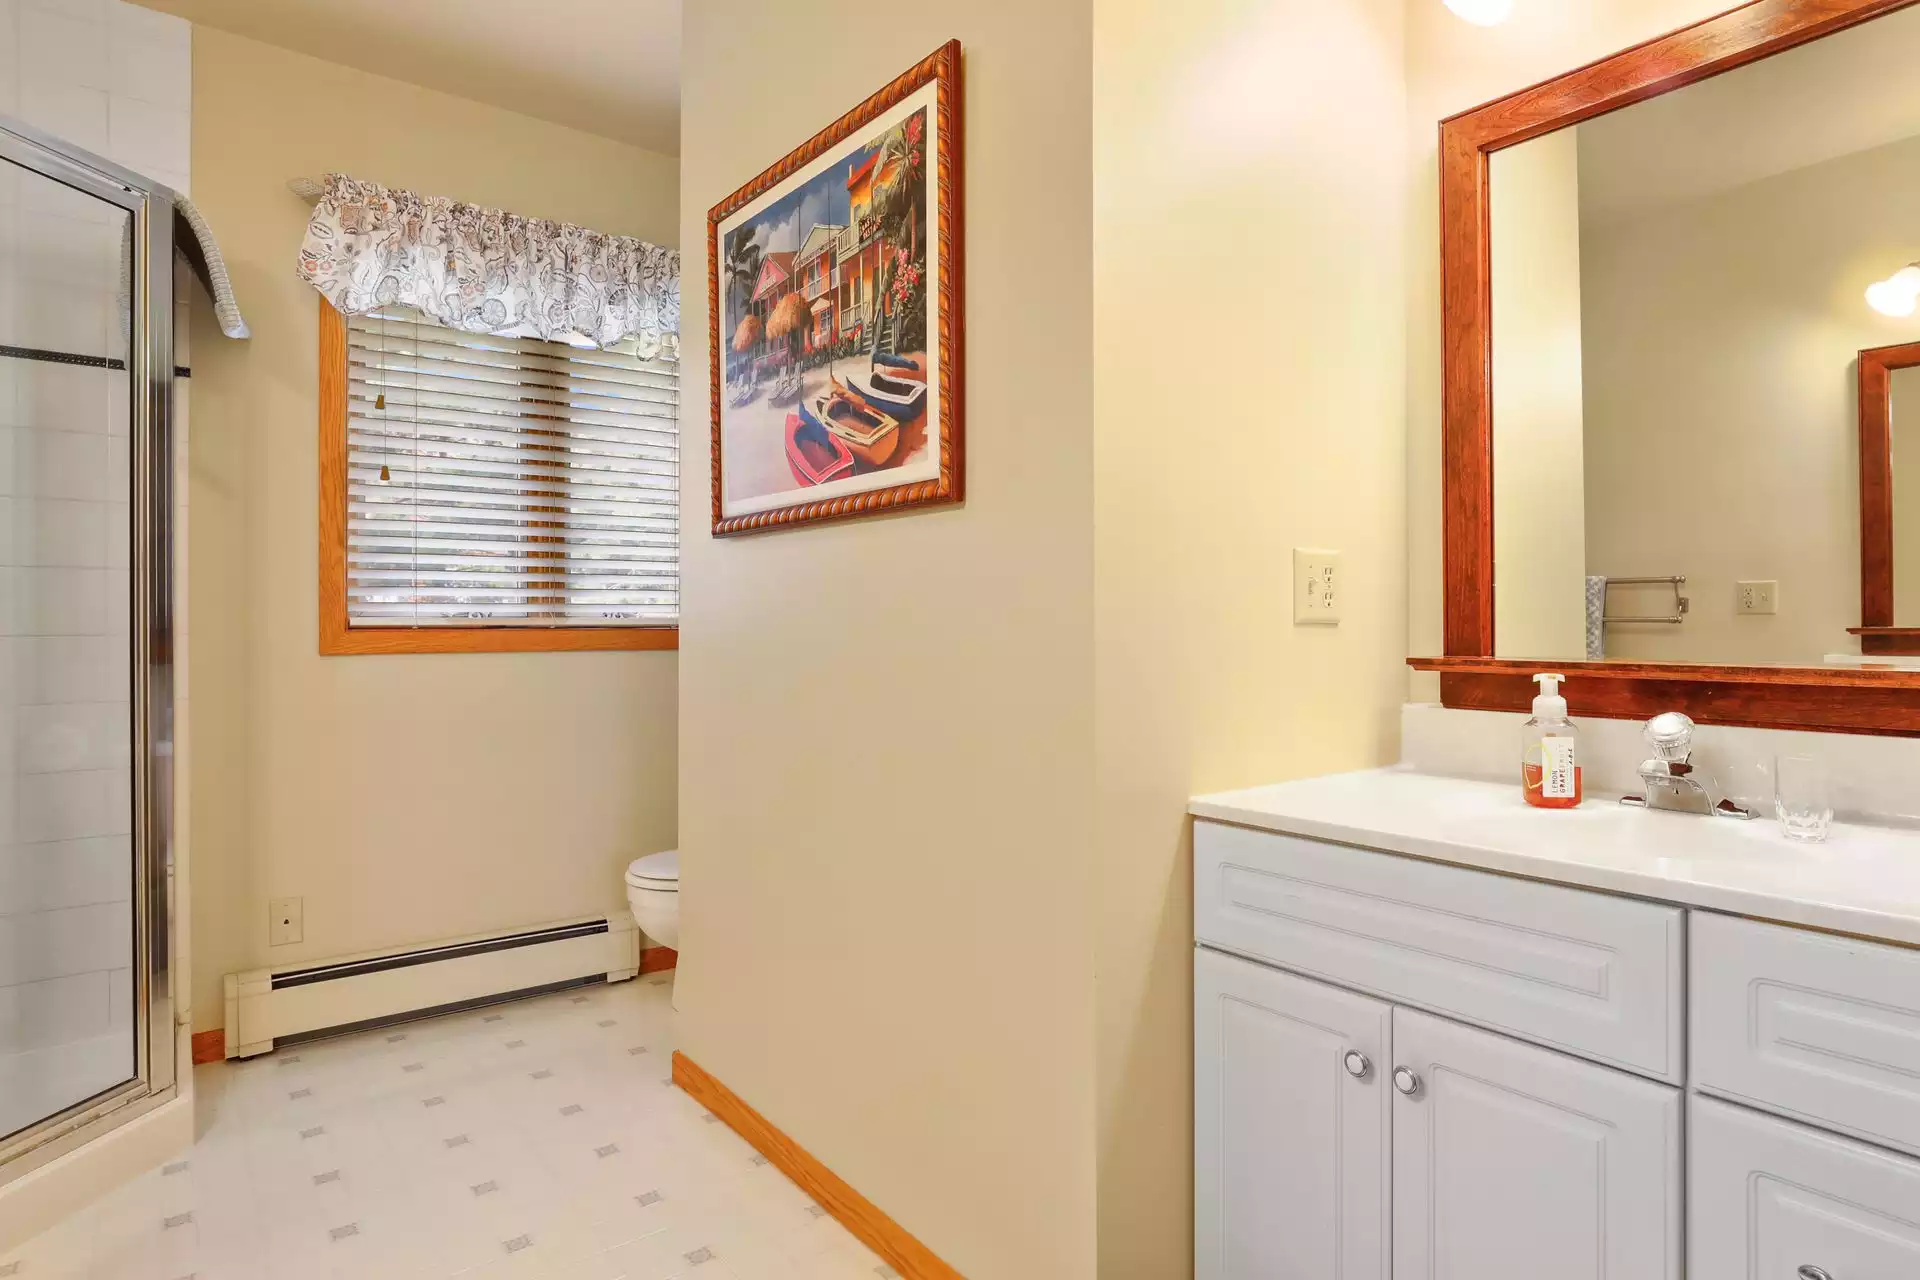 Maplewood Home For Sale Owner’s Suite Bath